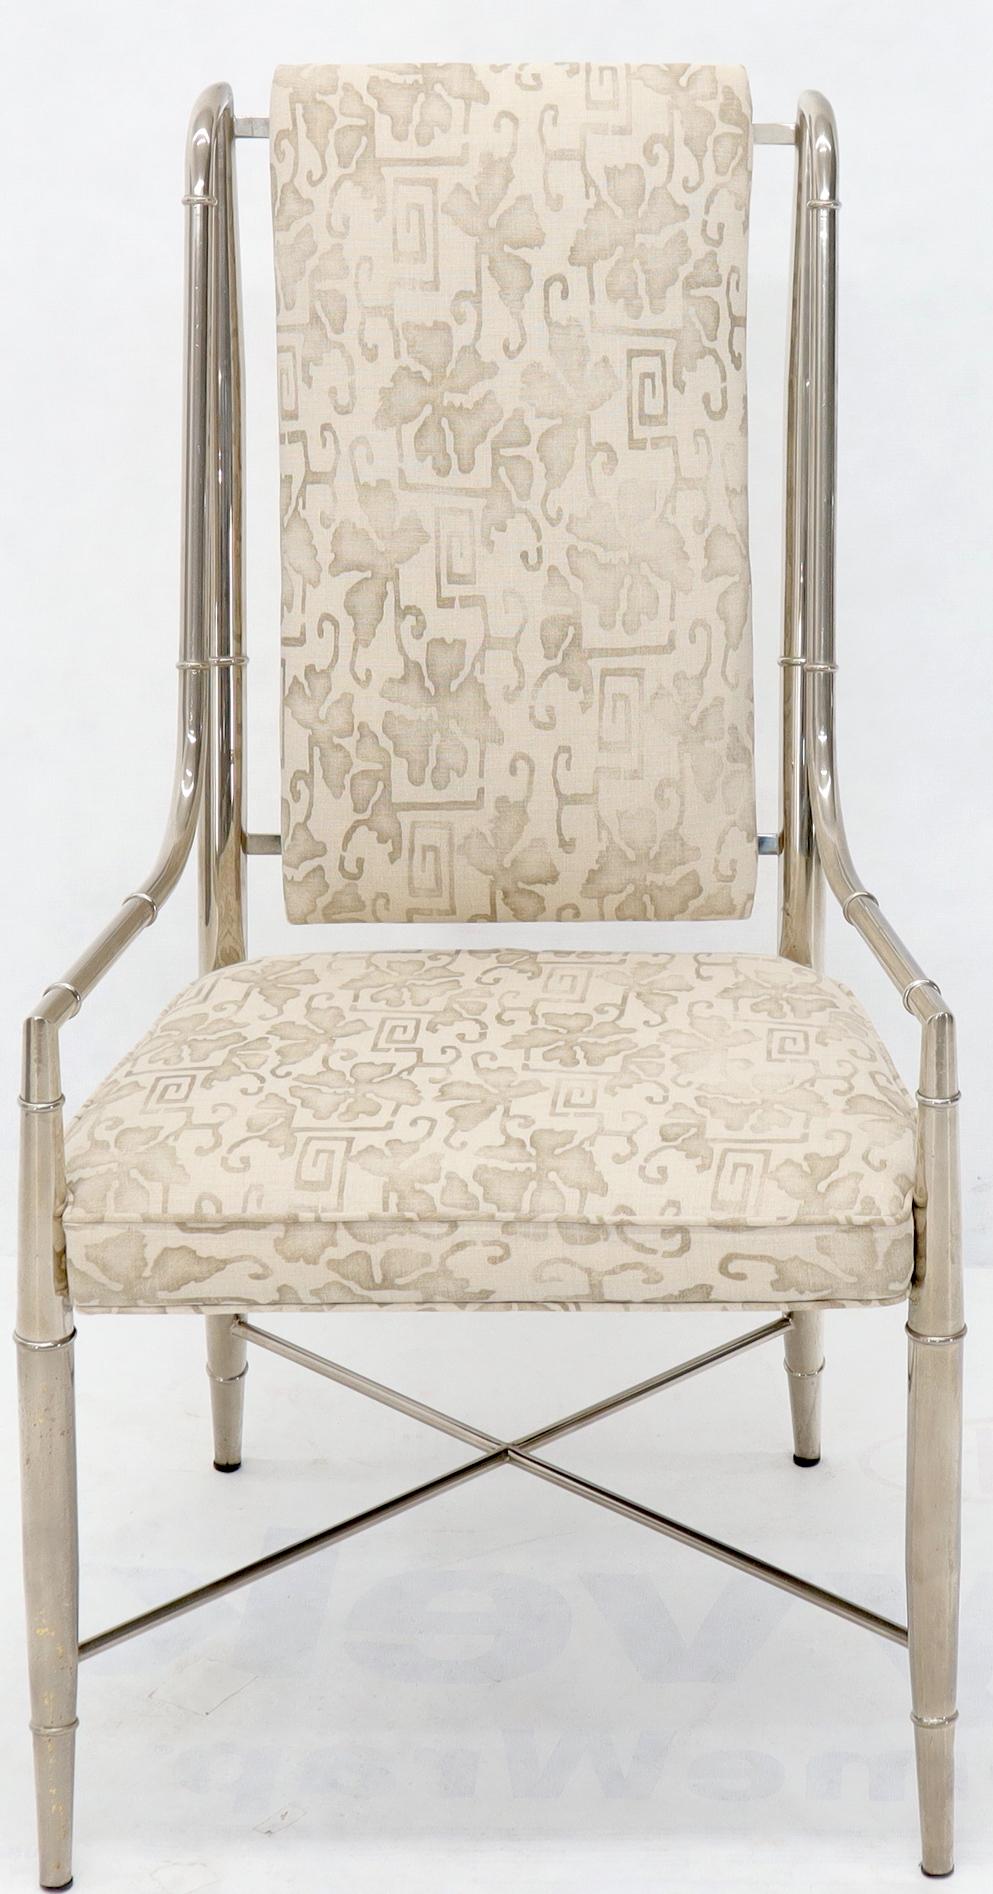 New linen upholstery Imperial Mastercraft chair in nickel or chrome. This is unusual non brass version.